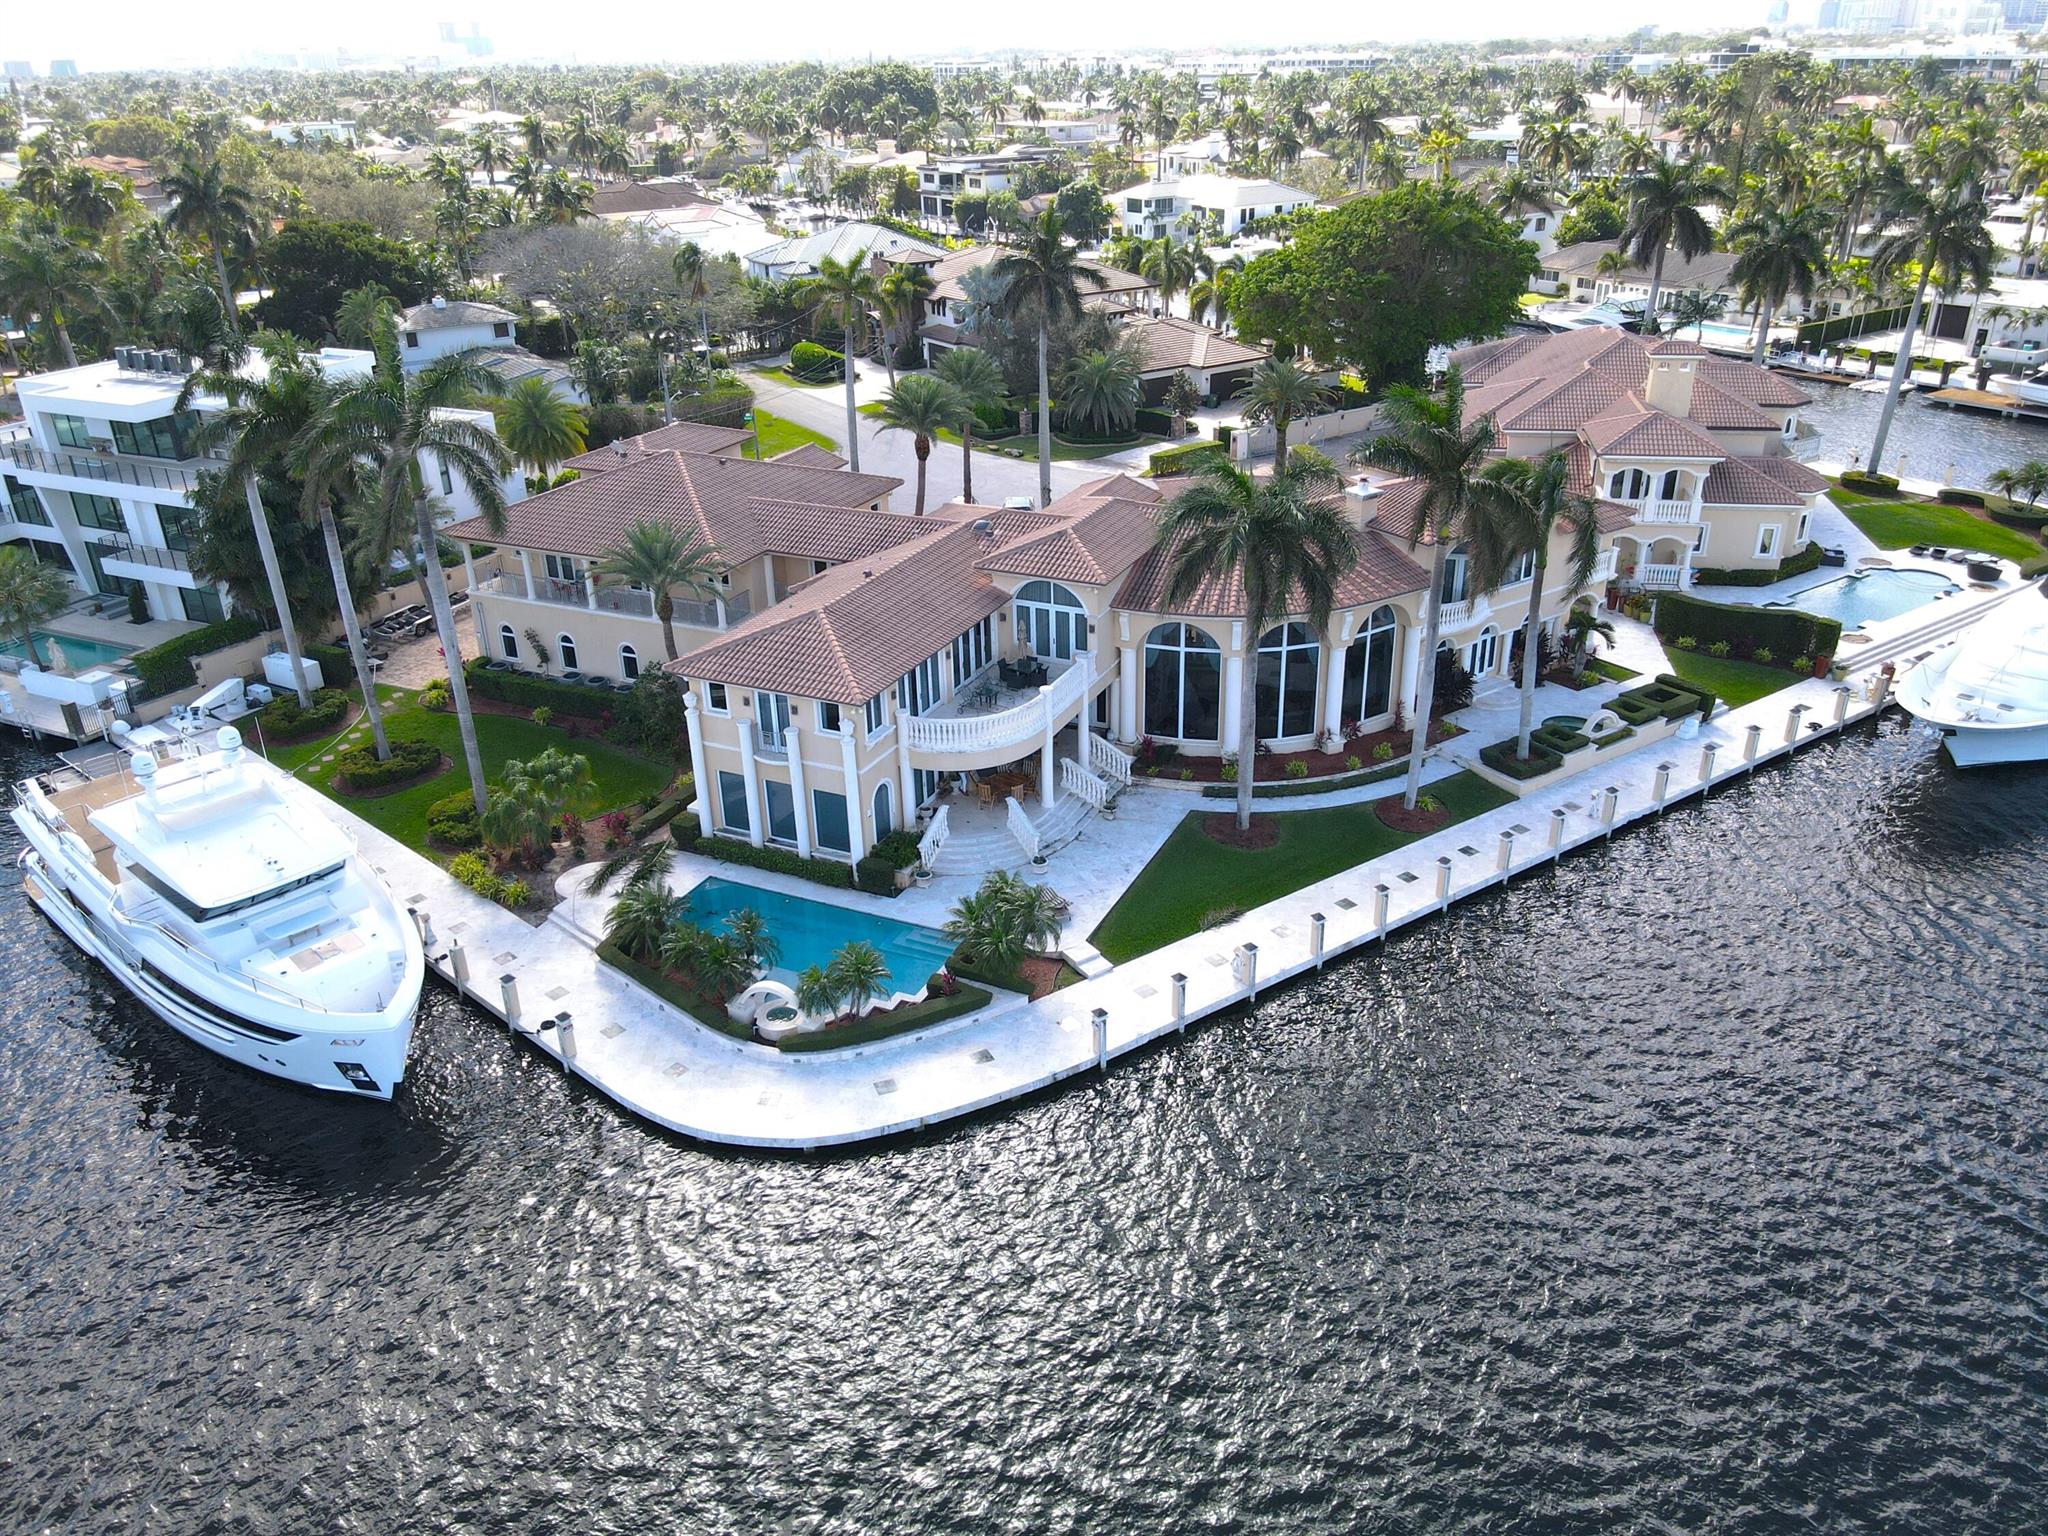 Experience the pinnacle of waterfront luxury with this exceptional point lot, boasting breathtaking views of the Rio Barcelona Canal and the Intracoastal. Nestled in the prestigious 'AAAA' location of Seven Isles, this extraordinary ultra-high-end water viewpoint lot is a blank canvas for your architectural masterpiece. Immerse yourself in a world of endless design possibilities, all within an exclusive, 24/7 security-patrolled community. This property features an 8 bedroom, 8 bathroom residence, complete with a full house generator, a unique 4,500 lb hydraulic deck crane, and an impressive 320 ft of water frontage. Embrace this rare opportunity to craft a generational legacy of opulence and luxury. Stay tuned for professional photos that will further highlight this unparalleled offering.